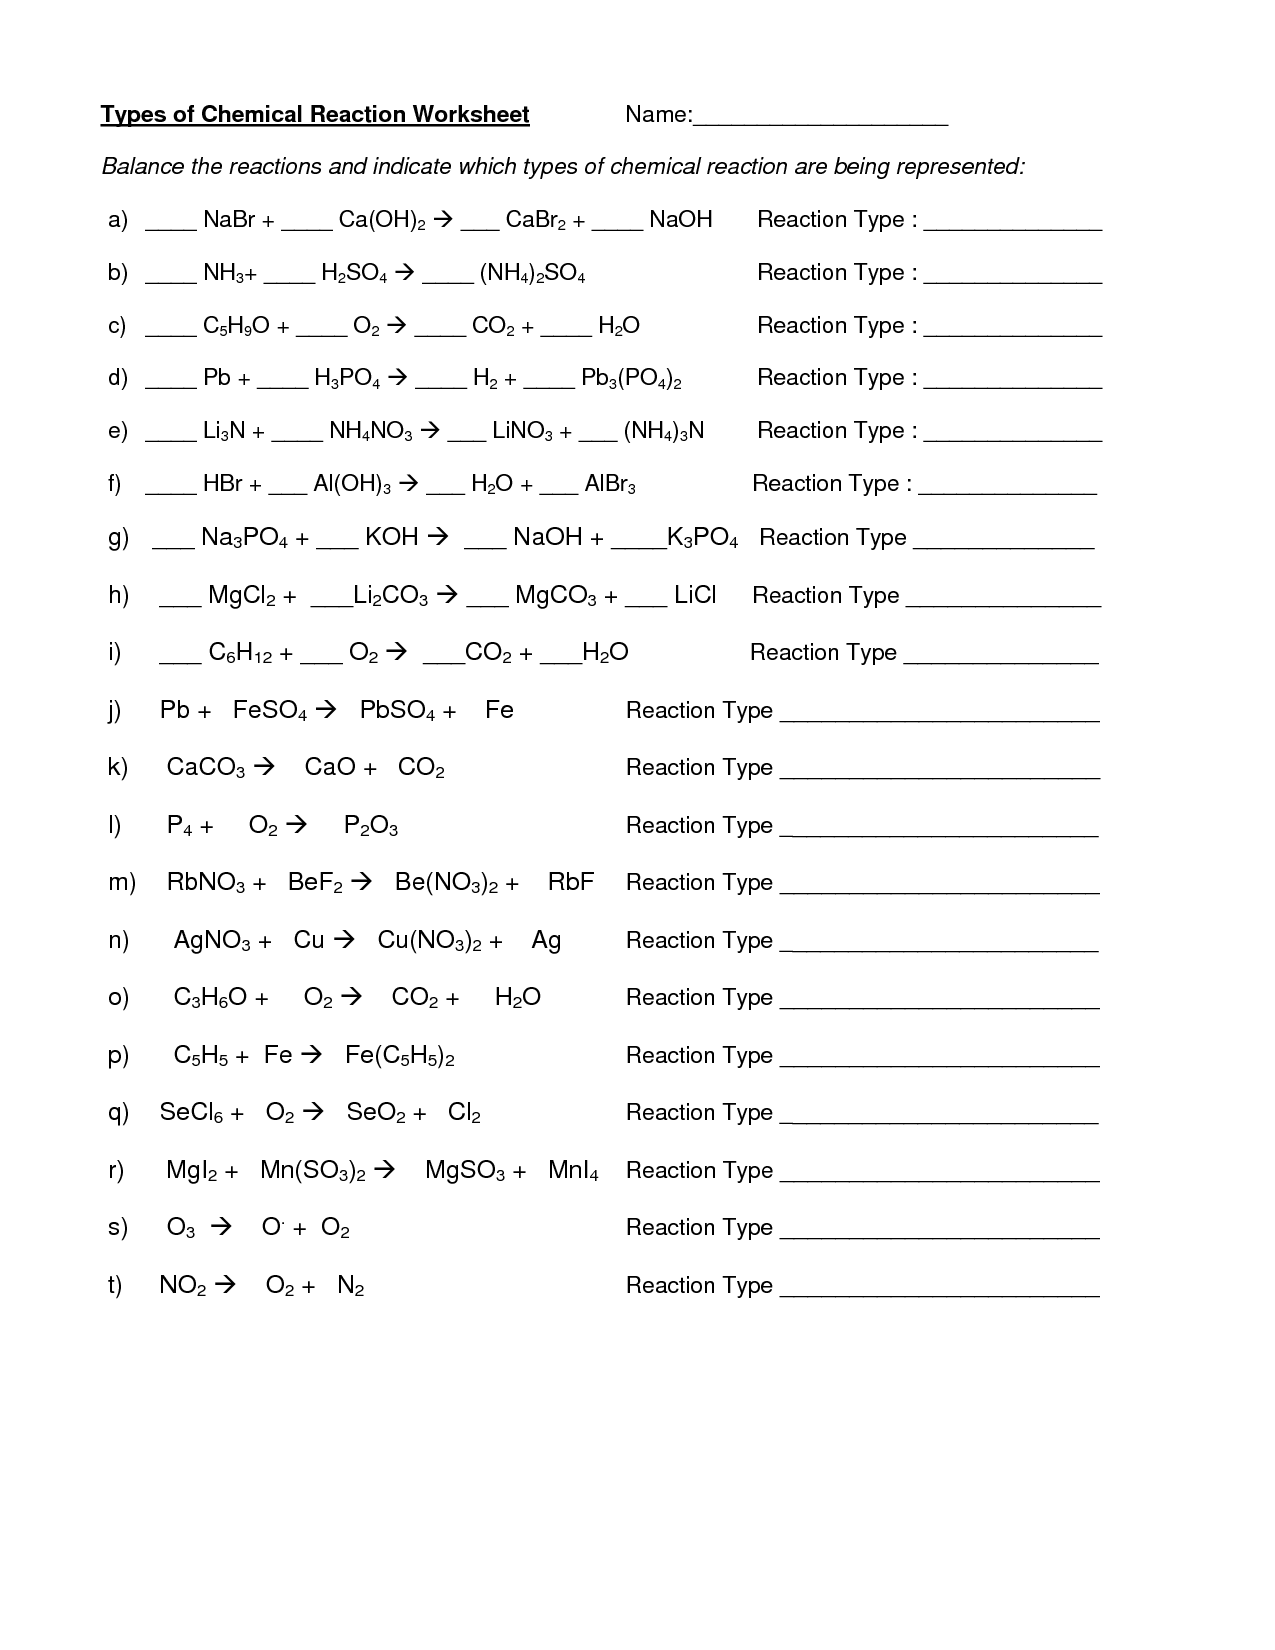 14-best-images-of-chemical-reactions-worksheet-types-chemical